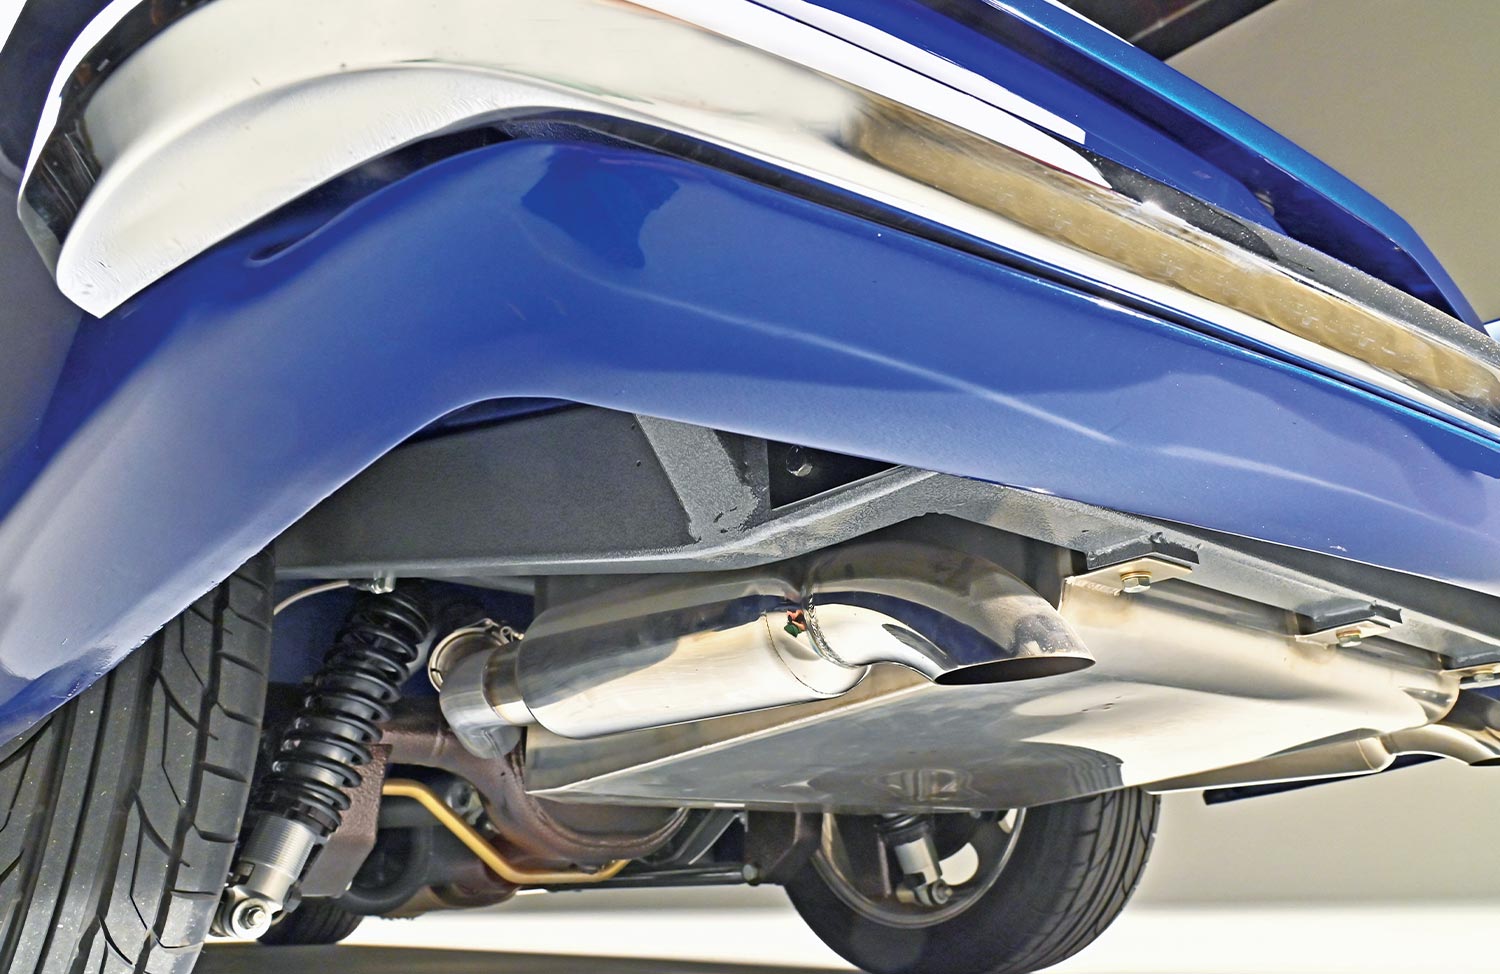 worm's eye angled view of ’55 Thunderbird convertible's rear undercarriage